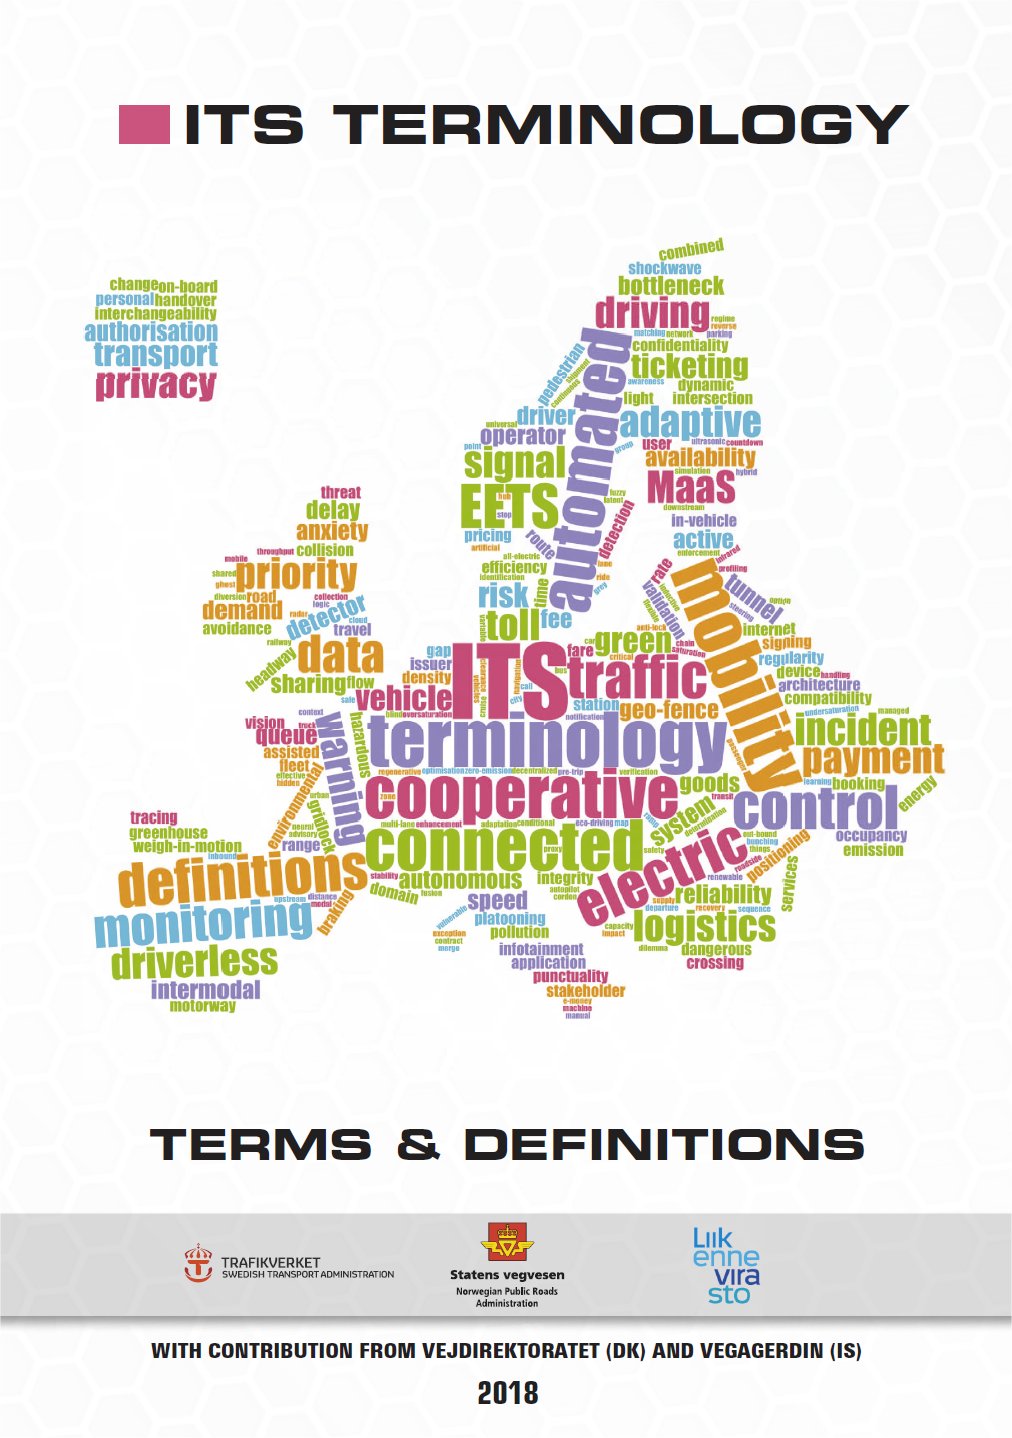 ITS Terminology 2018